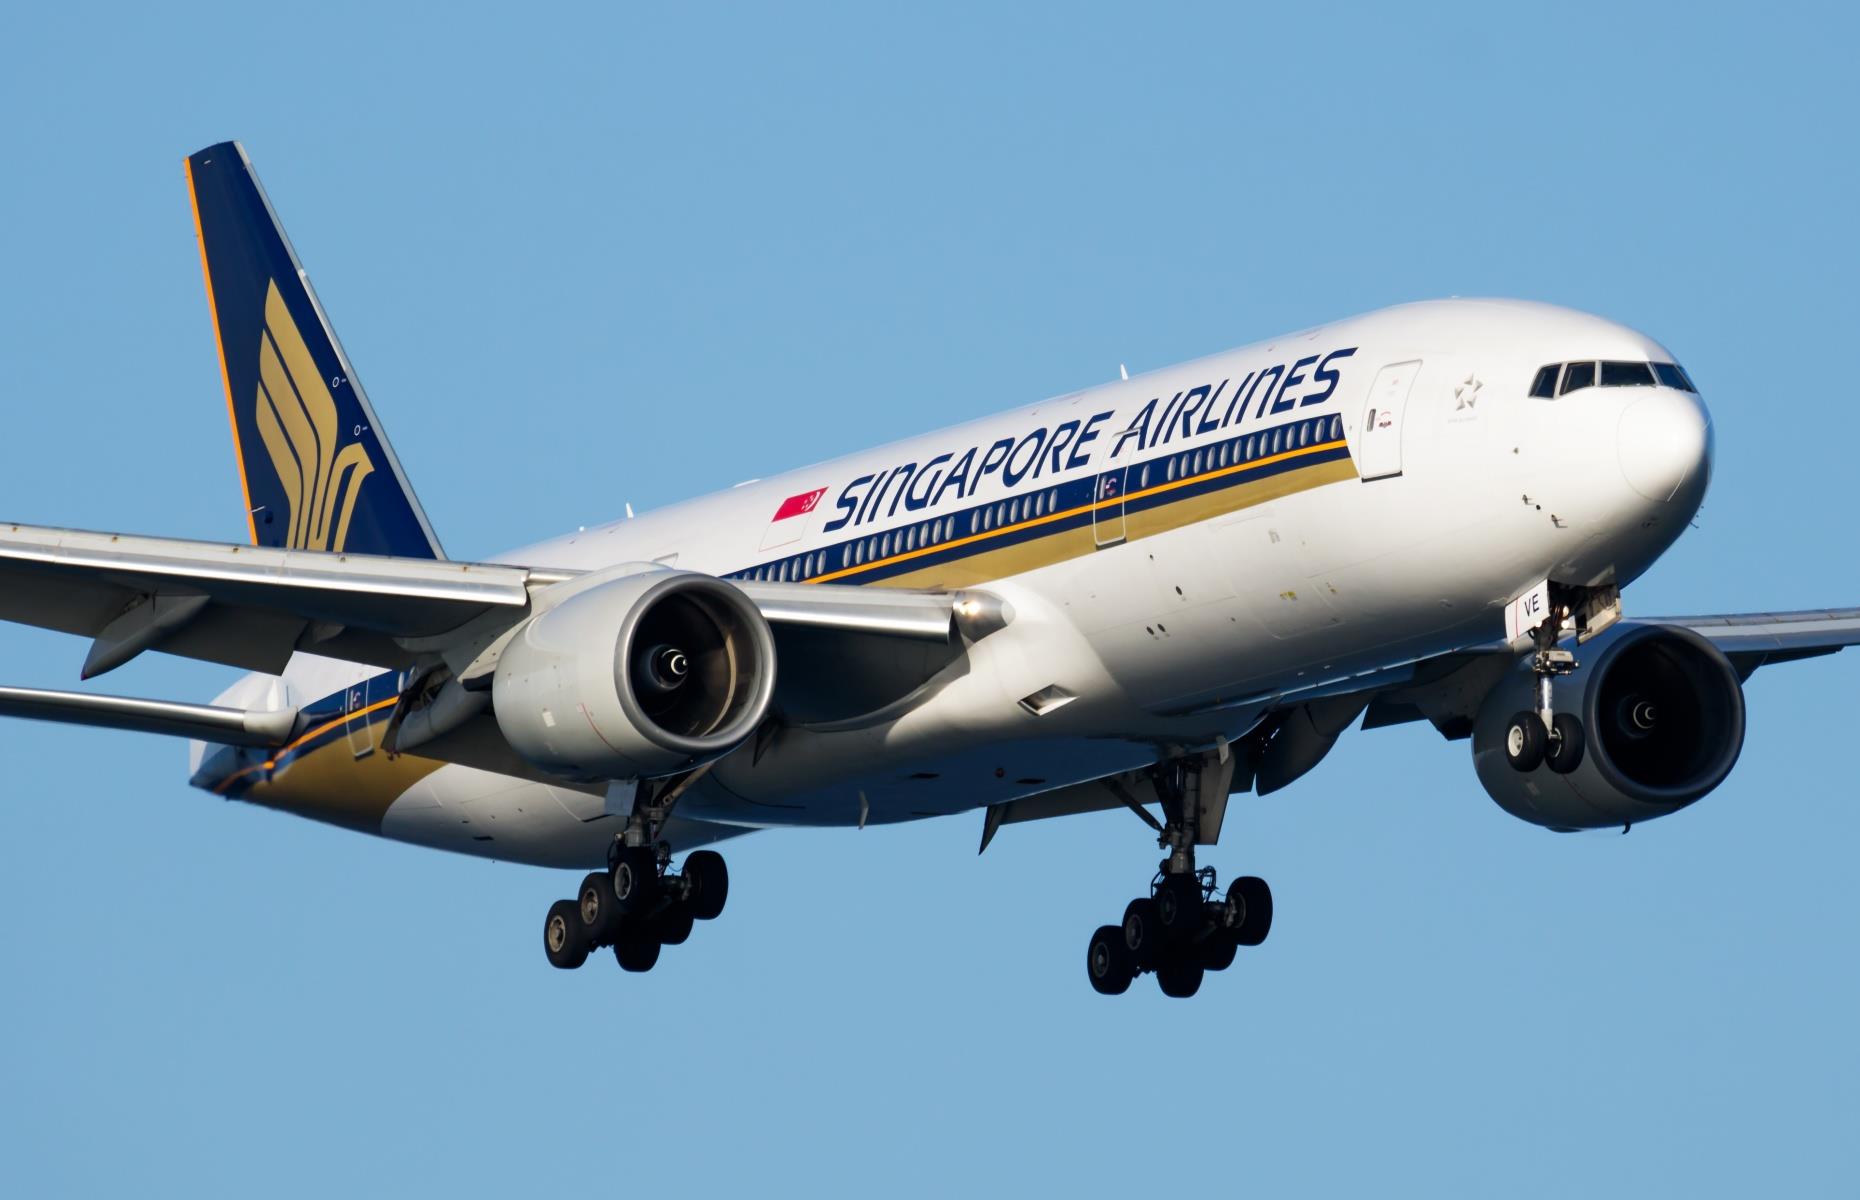 Ranked number one for 2023 in the World’s Top 100 Airlines is Singapore Airlines, making this the fifth time in the accolades’ 23-year history that the Singaporean flag carrier has been crowned the best of the best. It also beat out the competition in several other categories, including Best First Class Comfort Amenities, Best Business Class in Asia and Best Premium Economy Seat in Asia.